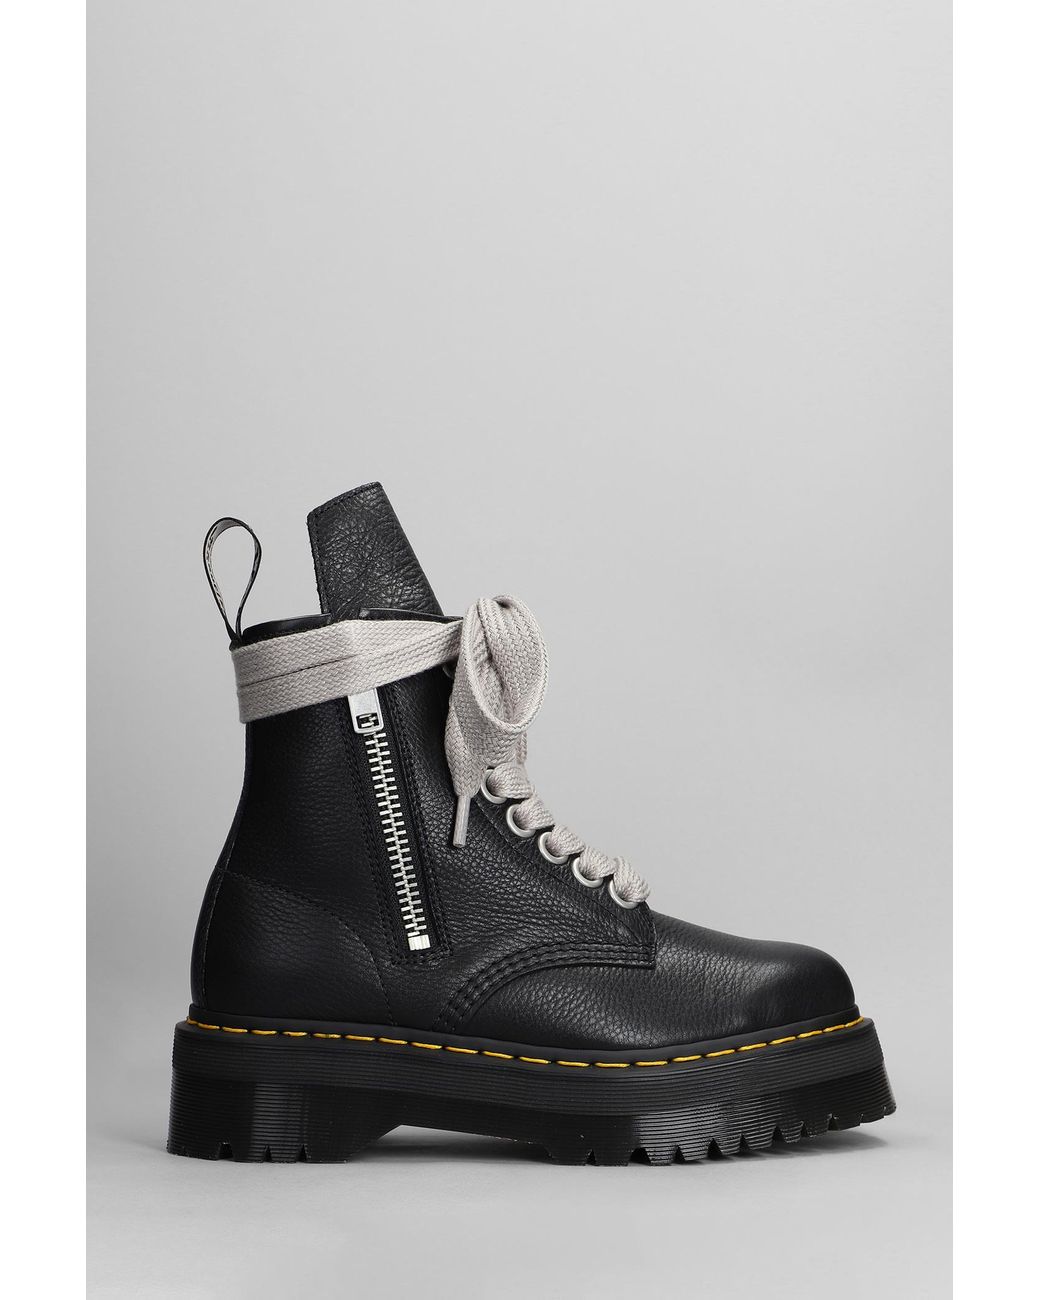 Rick Owens X Dr. Martens 1460 Quad Ro Combat Boots In Black Leather for ...